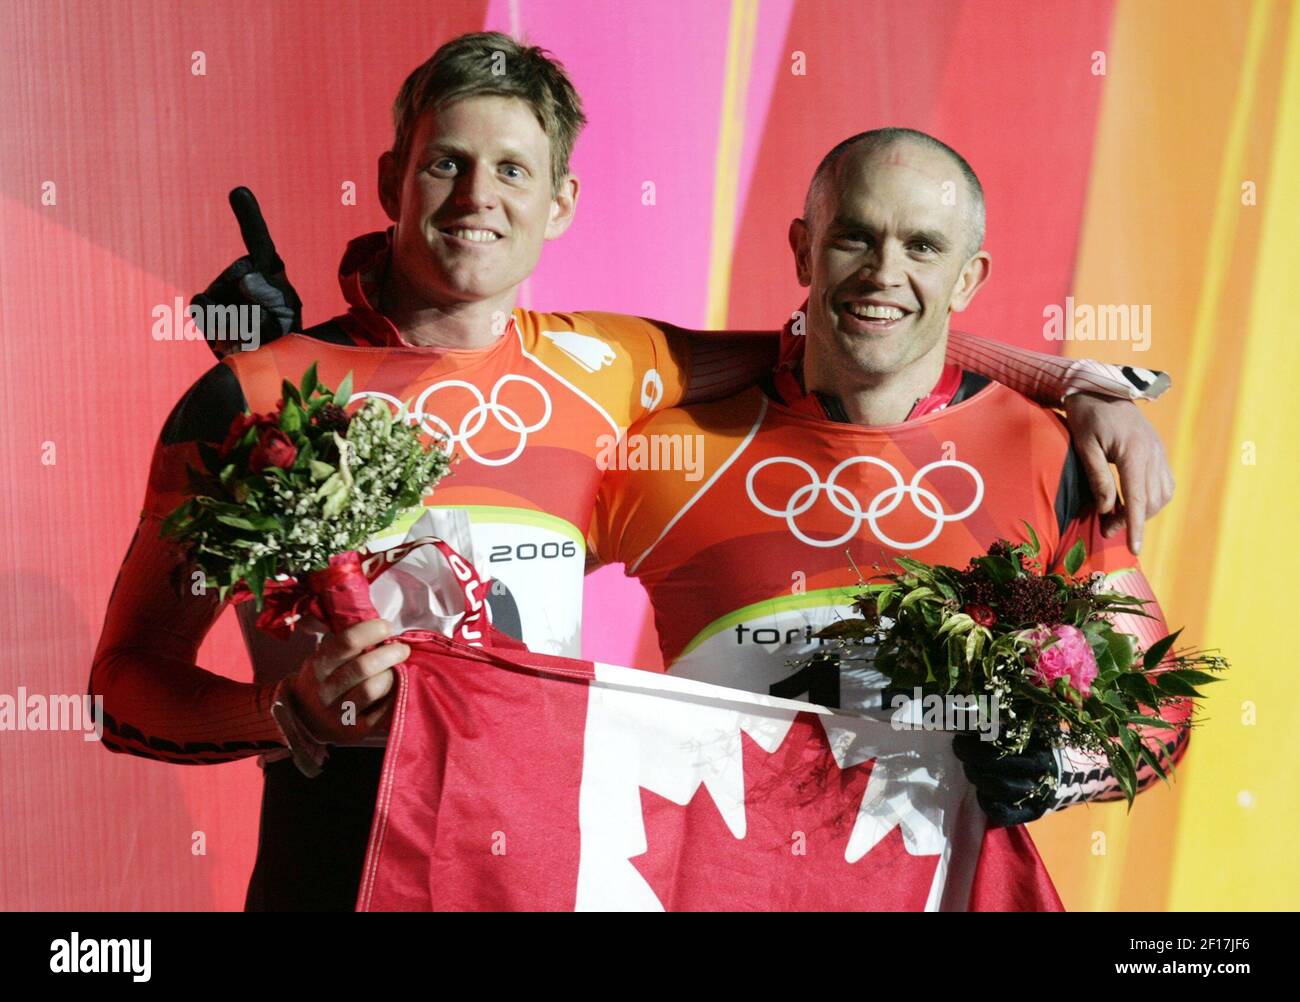 Jeff Pain of Canada, left, finished second and teammate Duff Gibson finished first at the Men's Skeleton on February 17, of the 2006 Winter Olympic Games in Cesana Pariol, Italy. (Photo by Barbara L. Johnston/KRT) Stock Photo